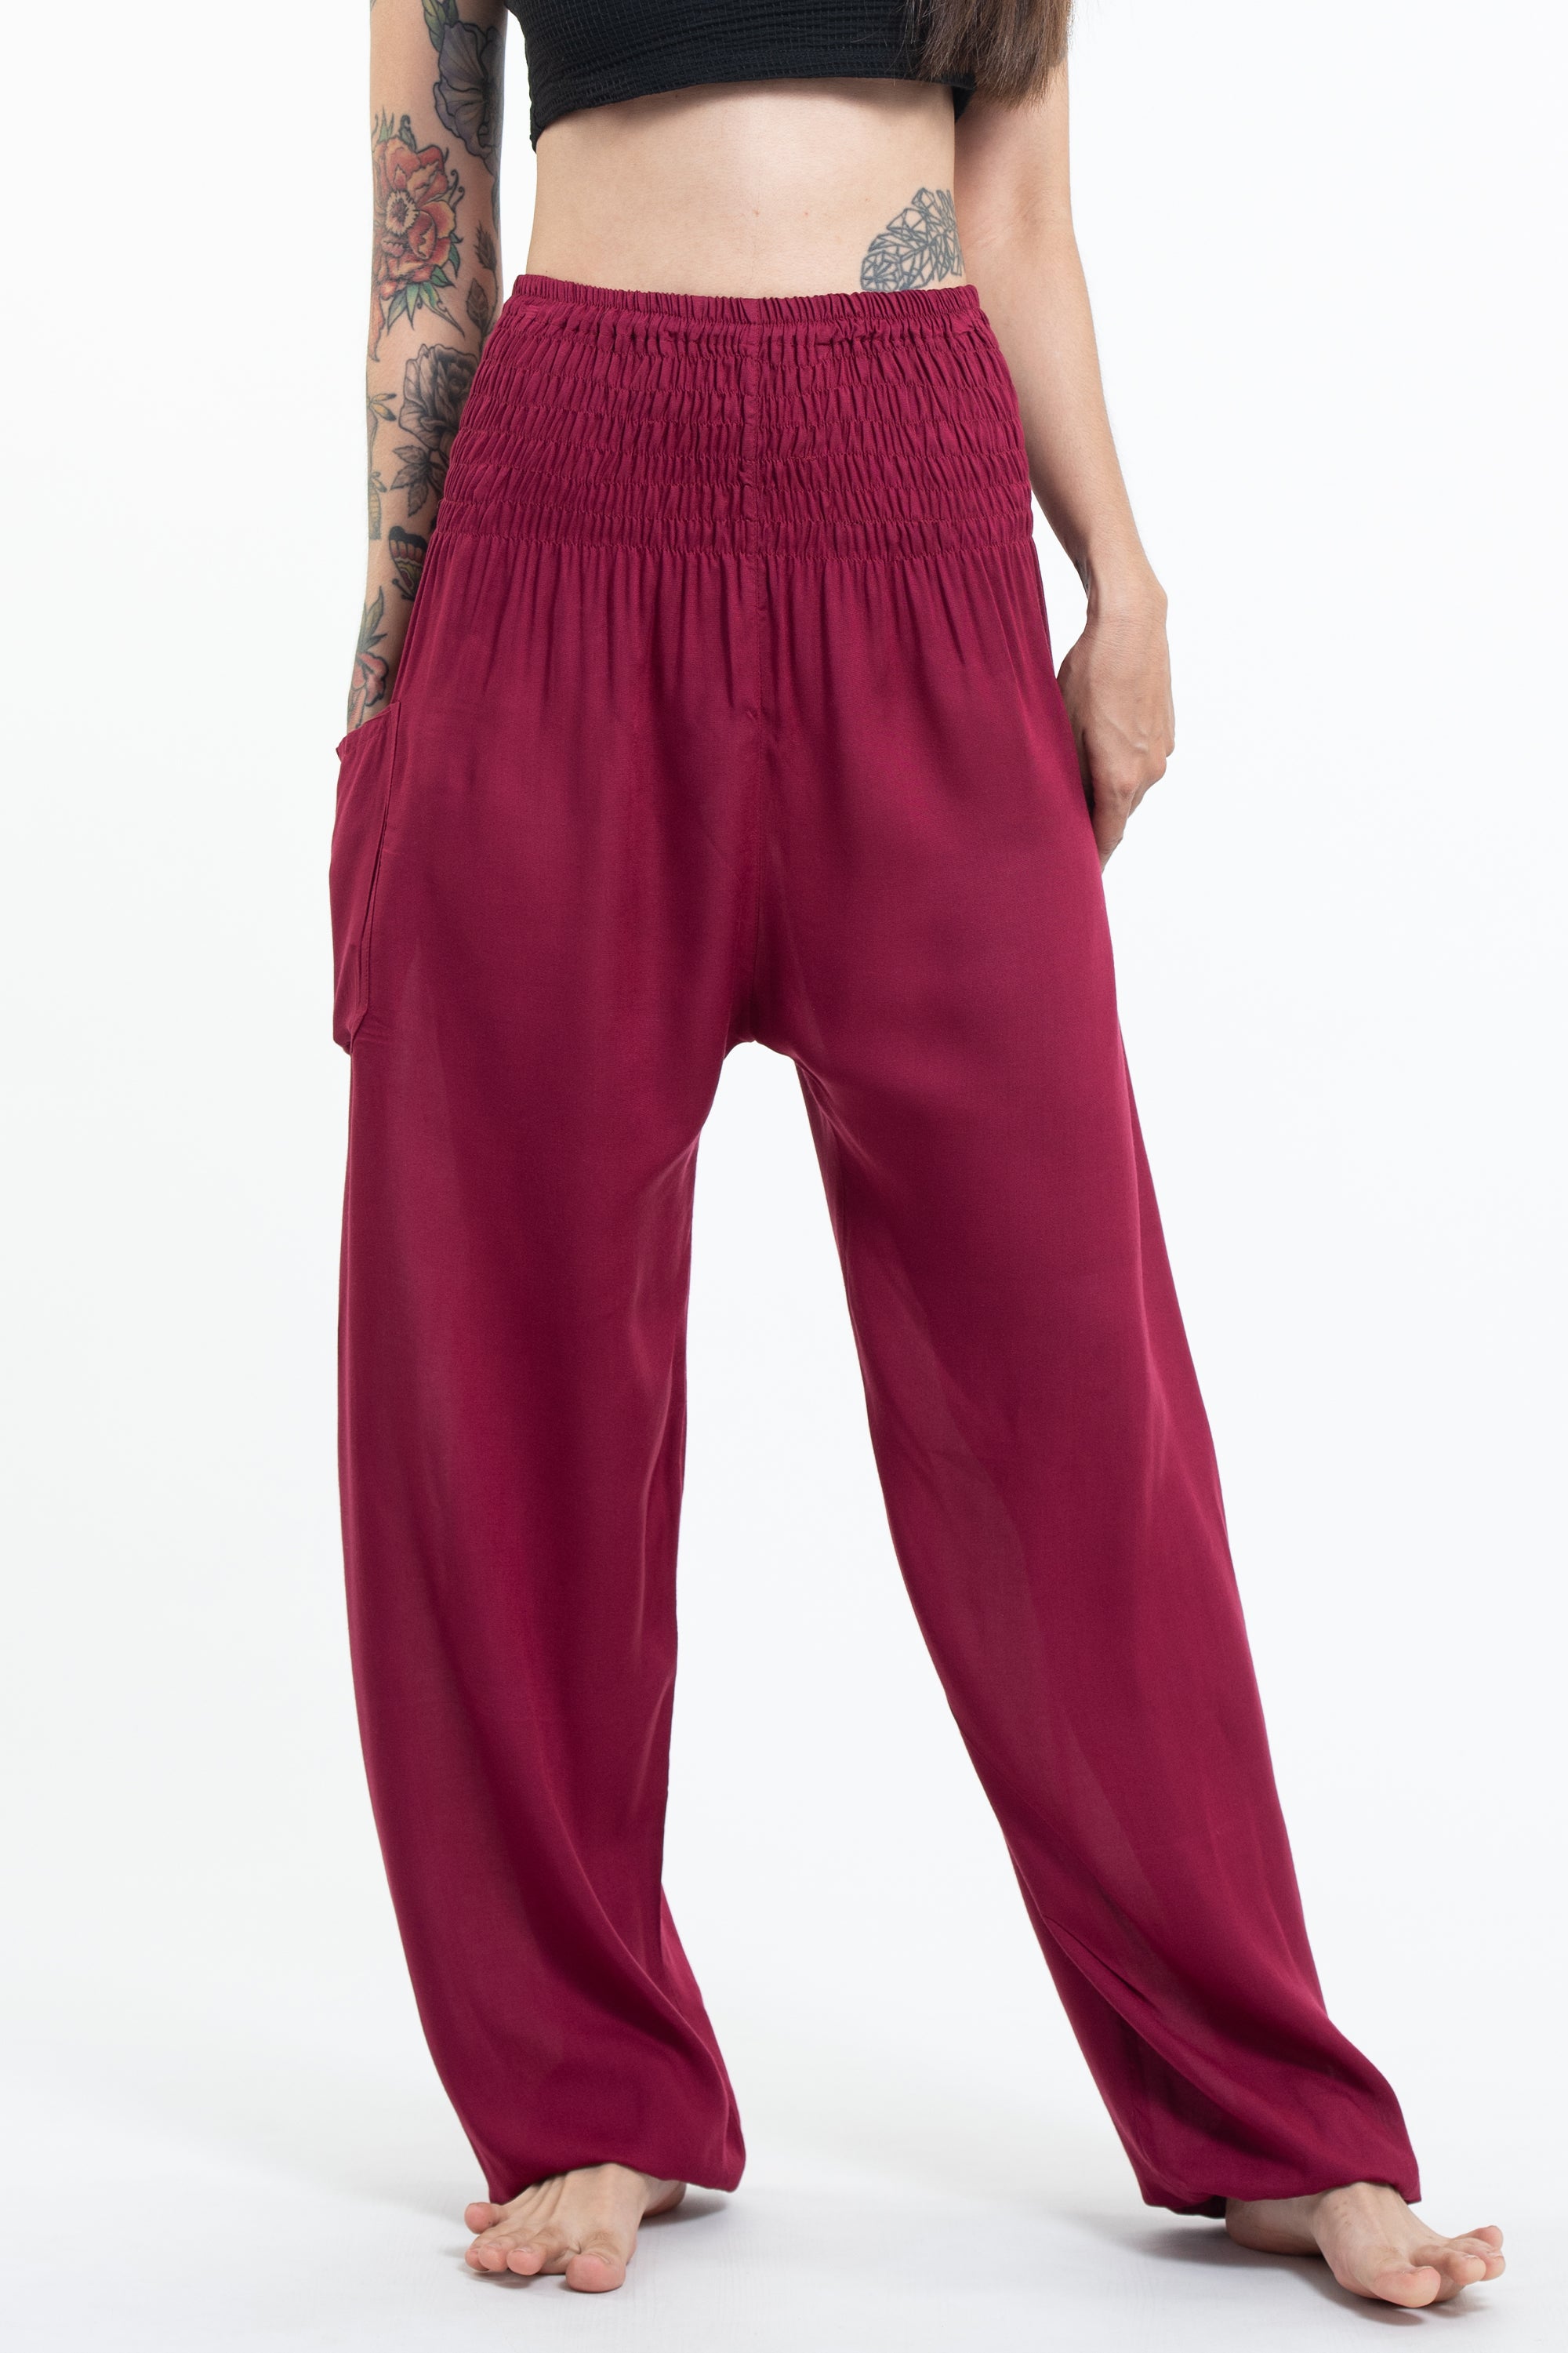 Comaba Men Chinese Style Cotton Linen Big  Tall Harem Pants Palazzo  Trousers AS3 2XL price in UAE  Amazon UAE  kanbkam